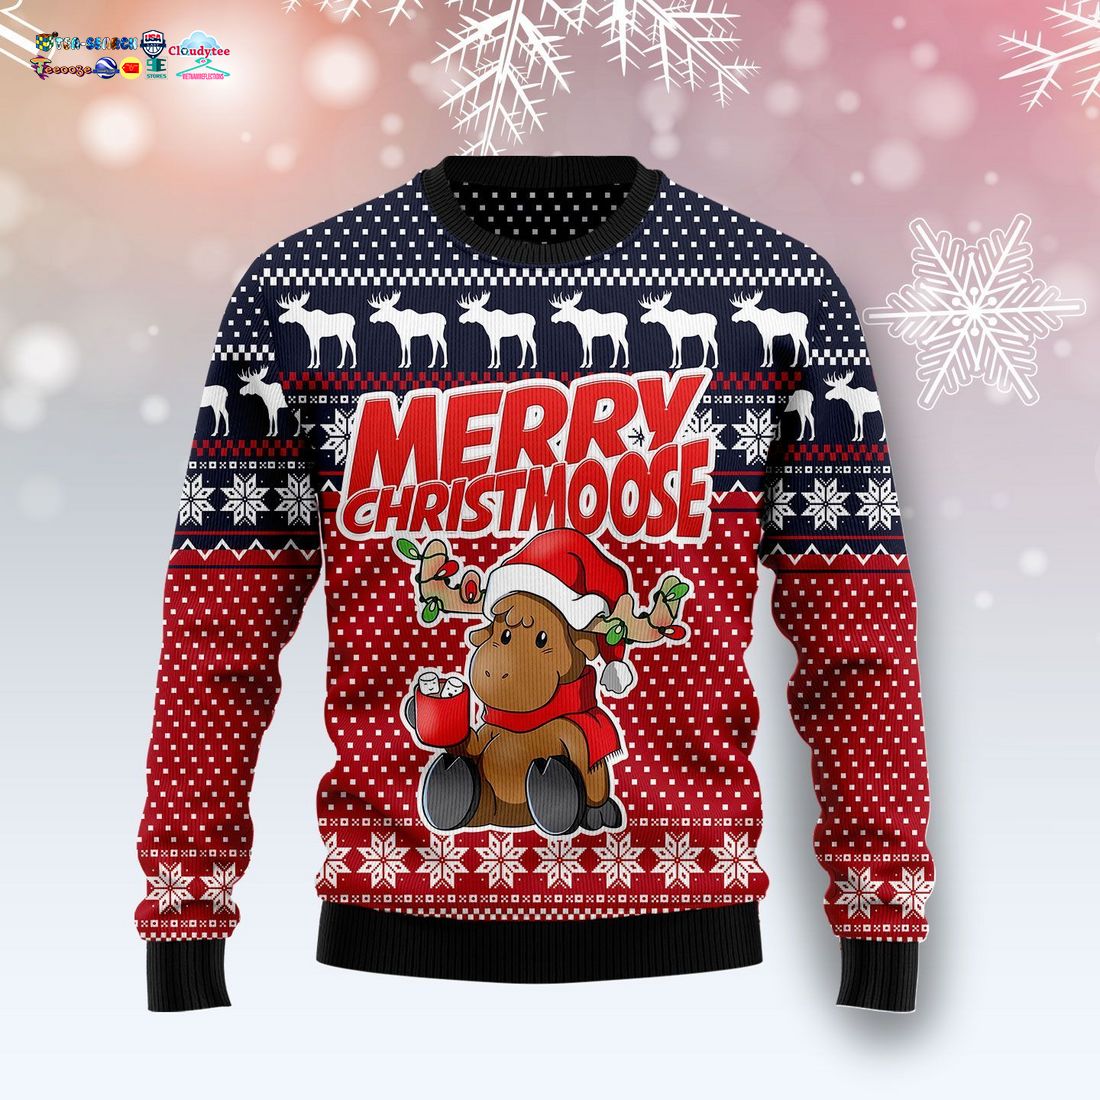 Merry Christmoose Ugly Christmas Sweater - Elegant and sober Pic